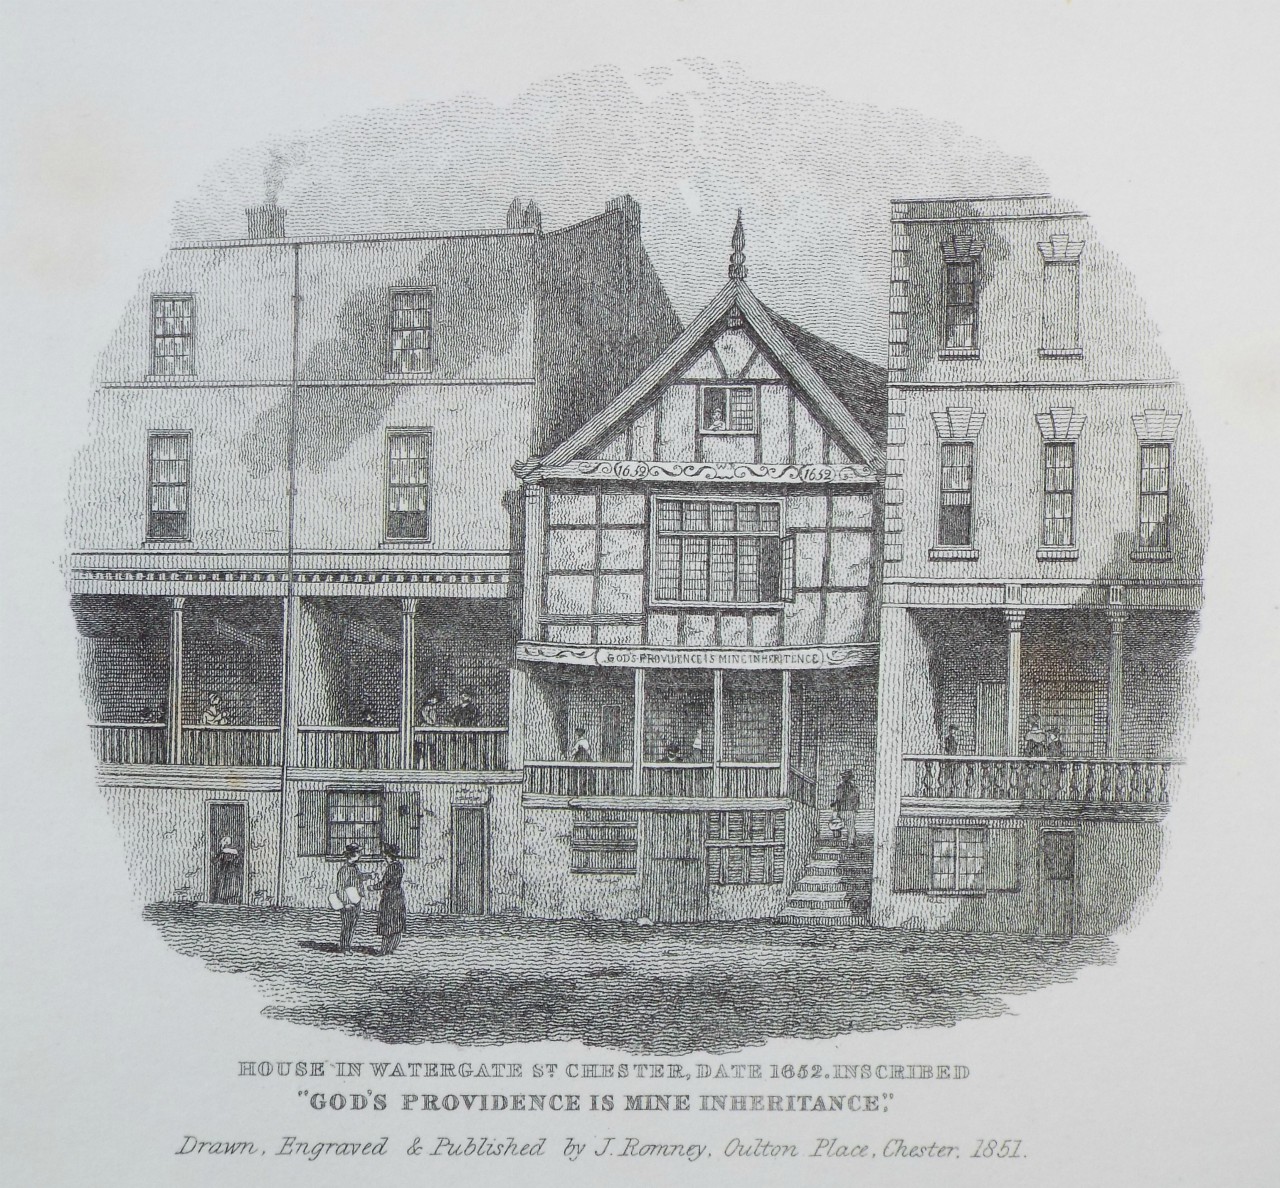 Print - House in Watergate St. Chester, Date 1652, Inscribed 